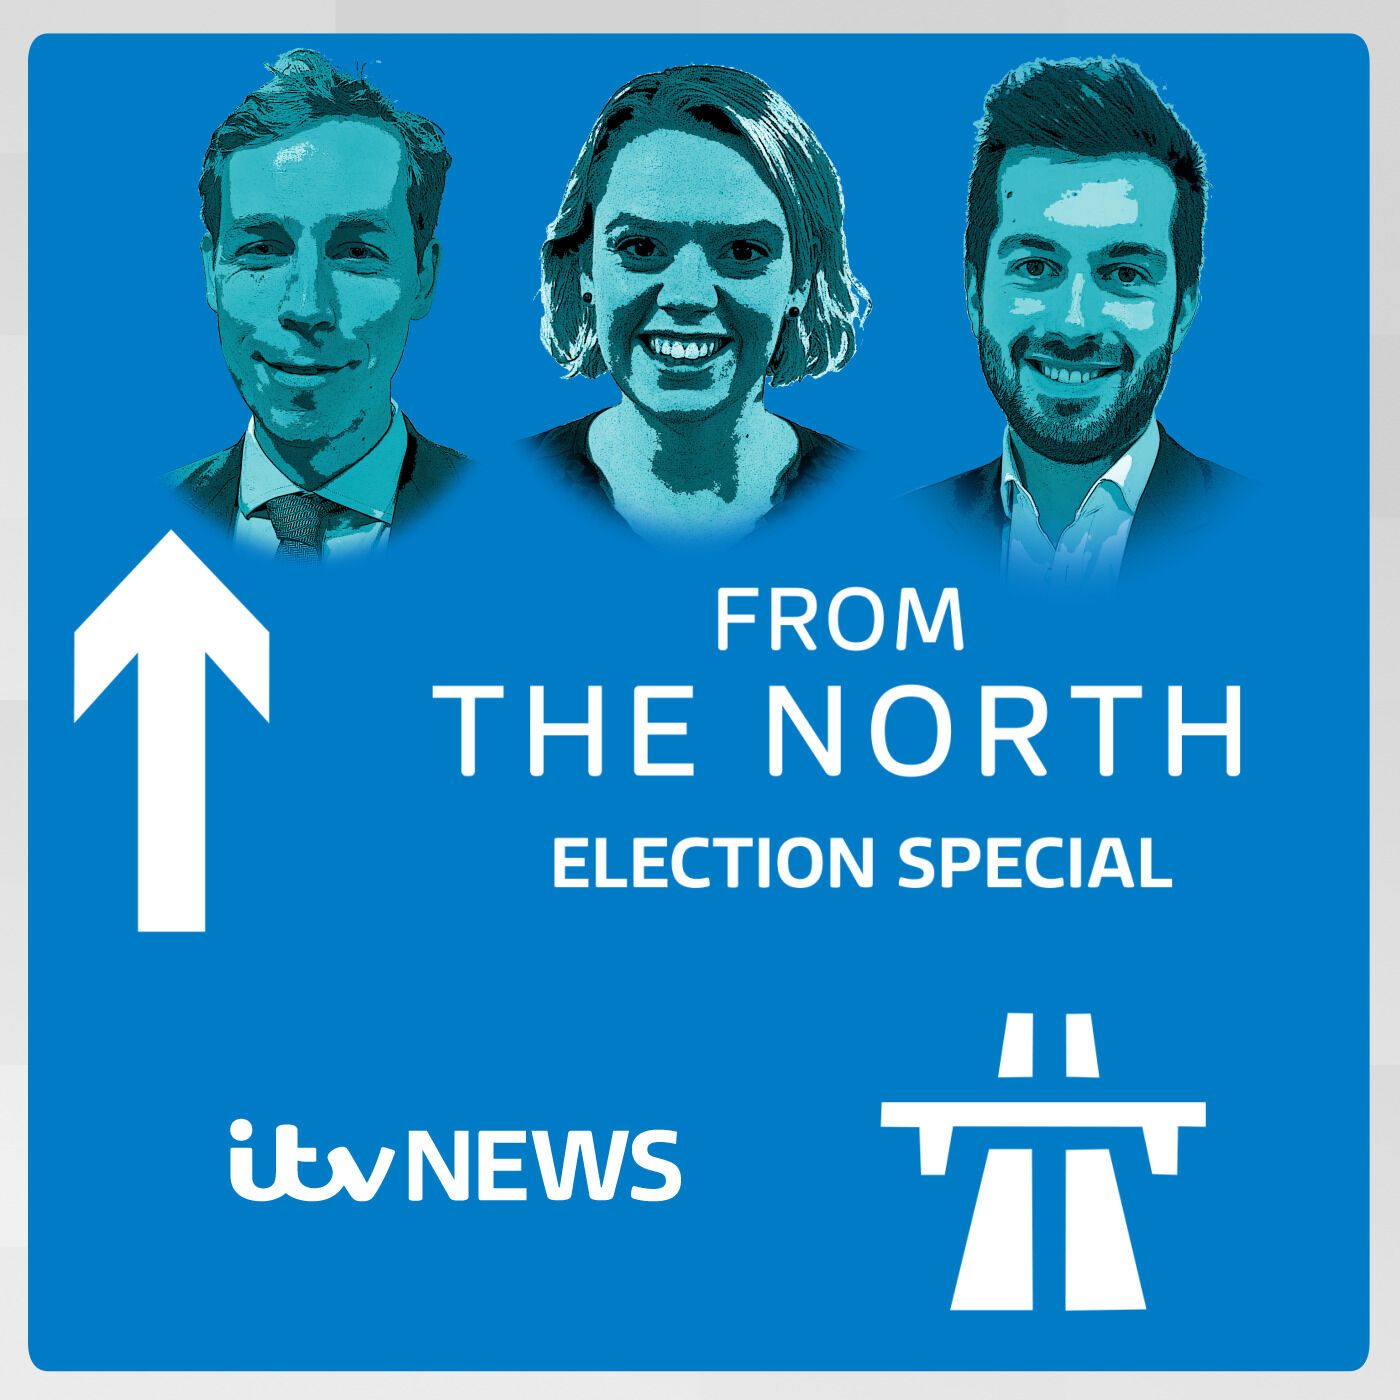 Election Special: Week One - From floods to Farage